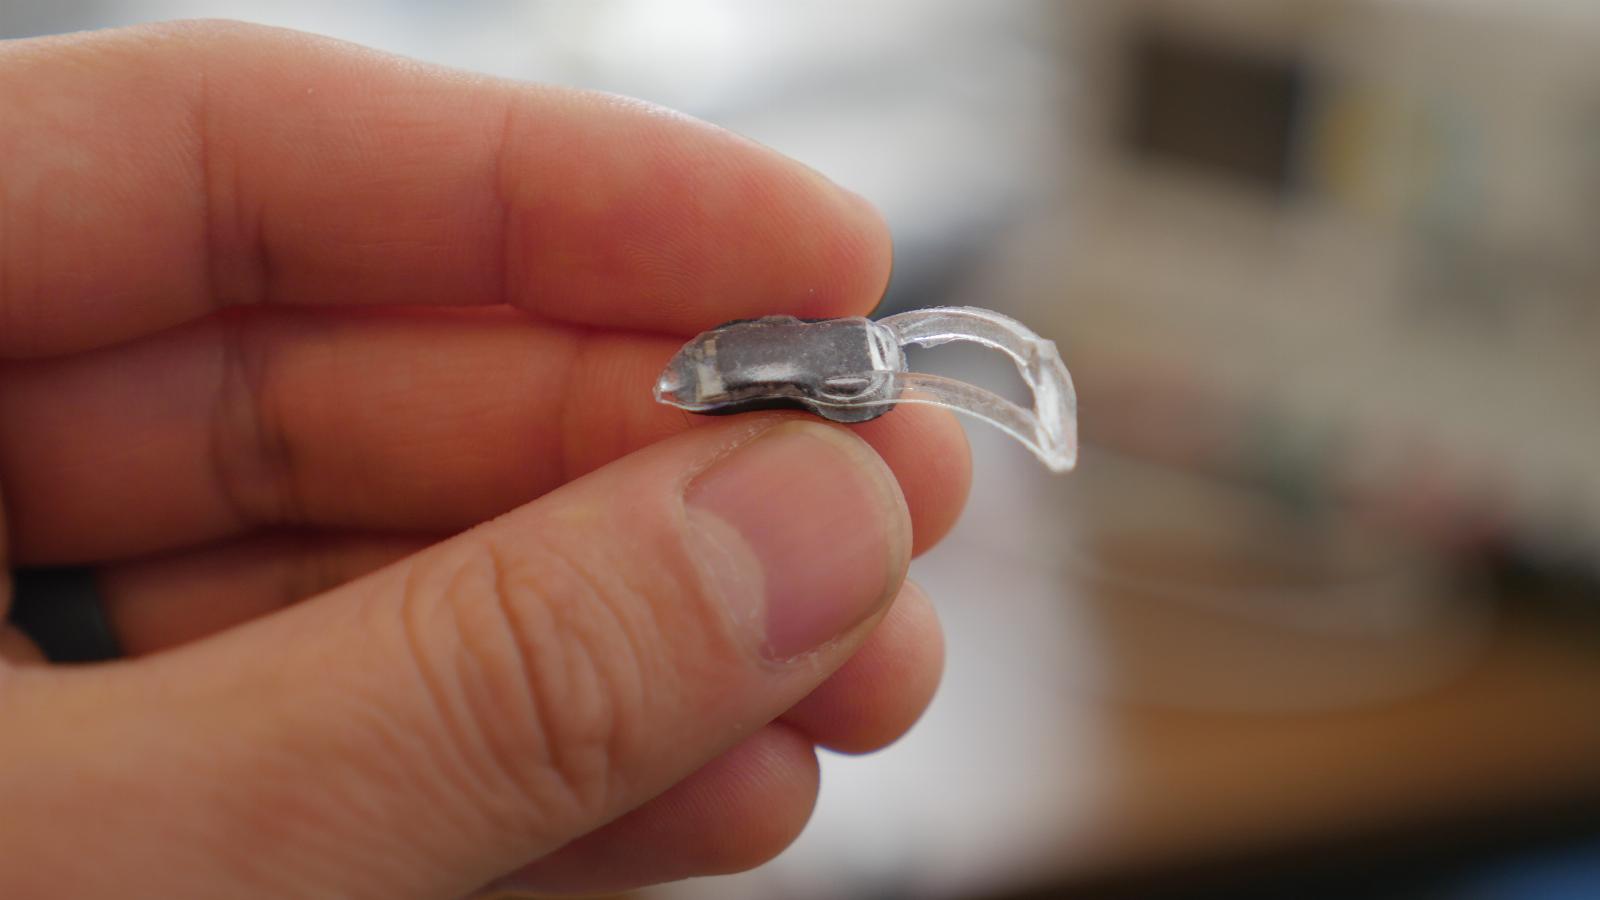 This little wearable is designed to detect blood flow to the brain